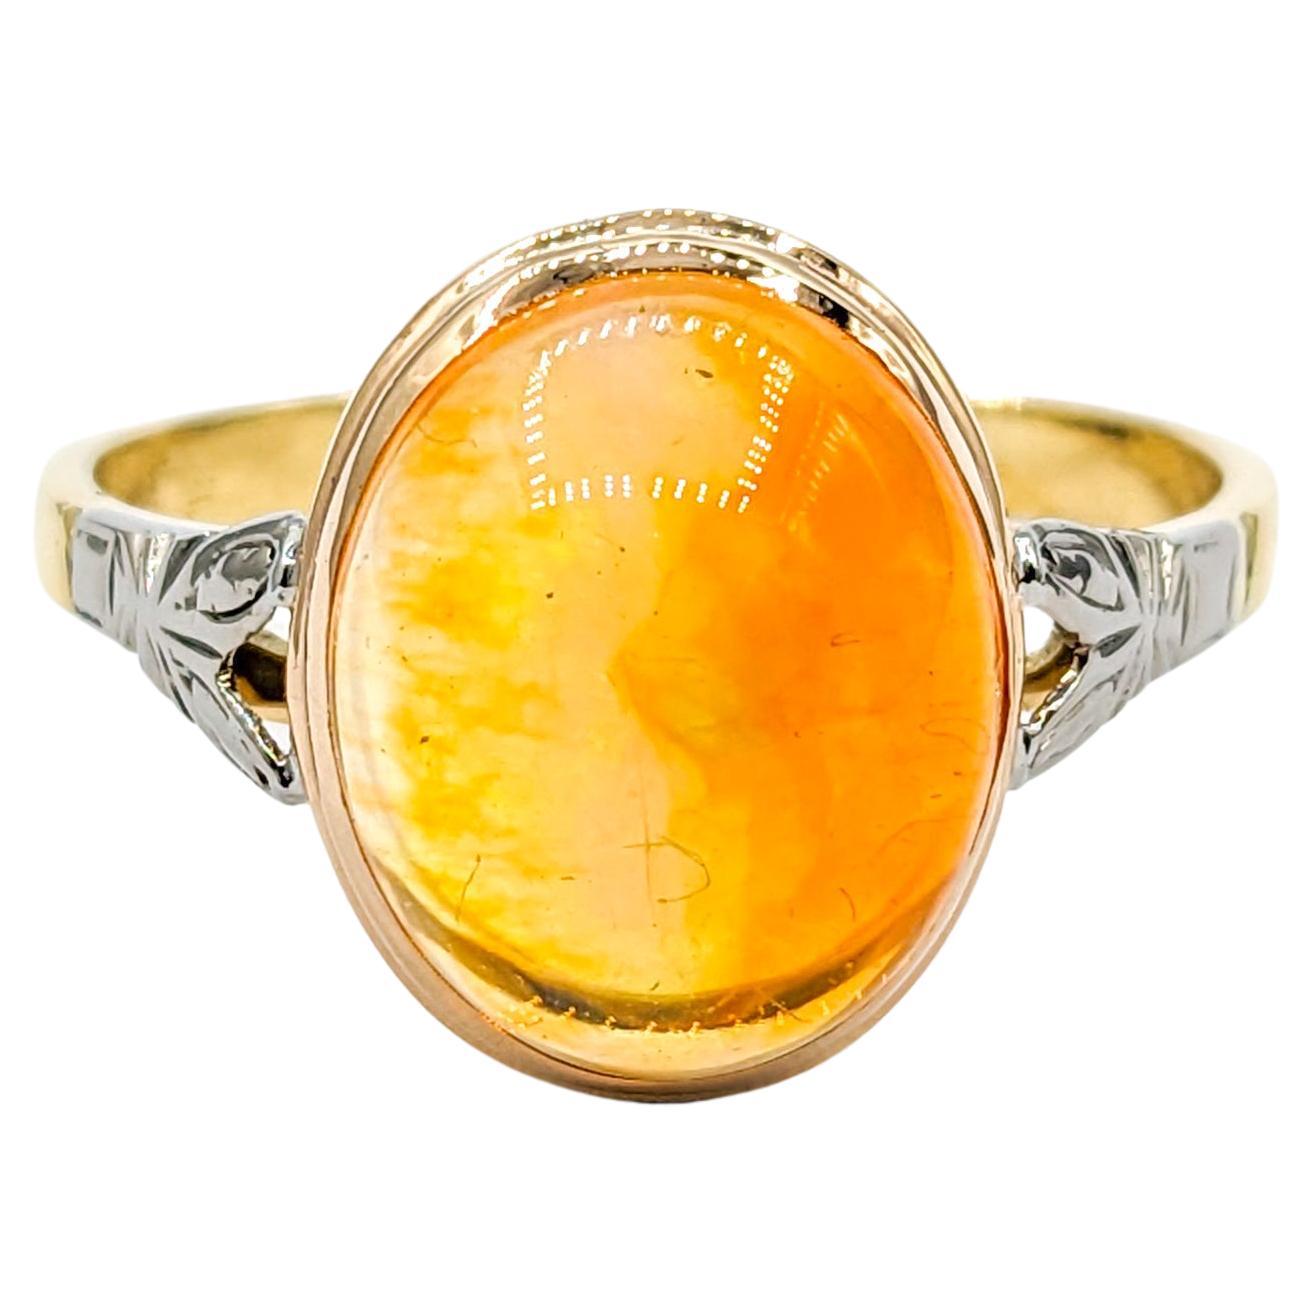 Cabochon Fire Opal Ring In Yellow Gold